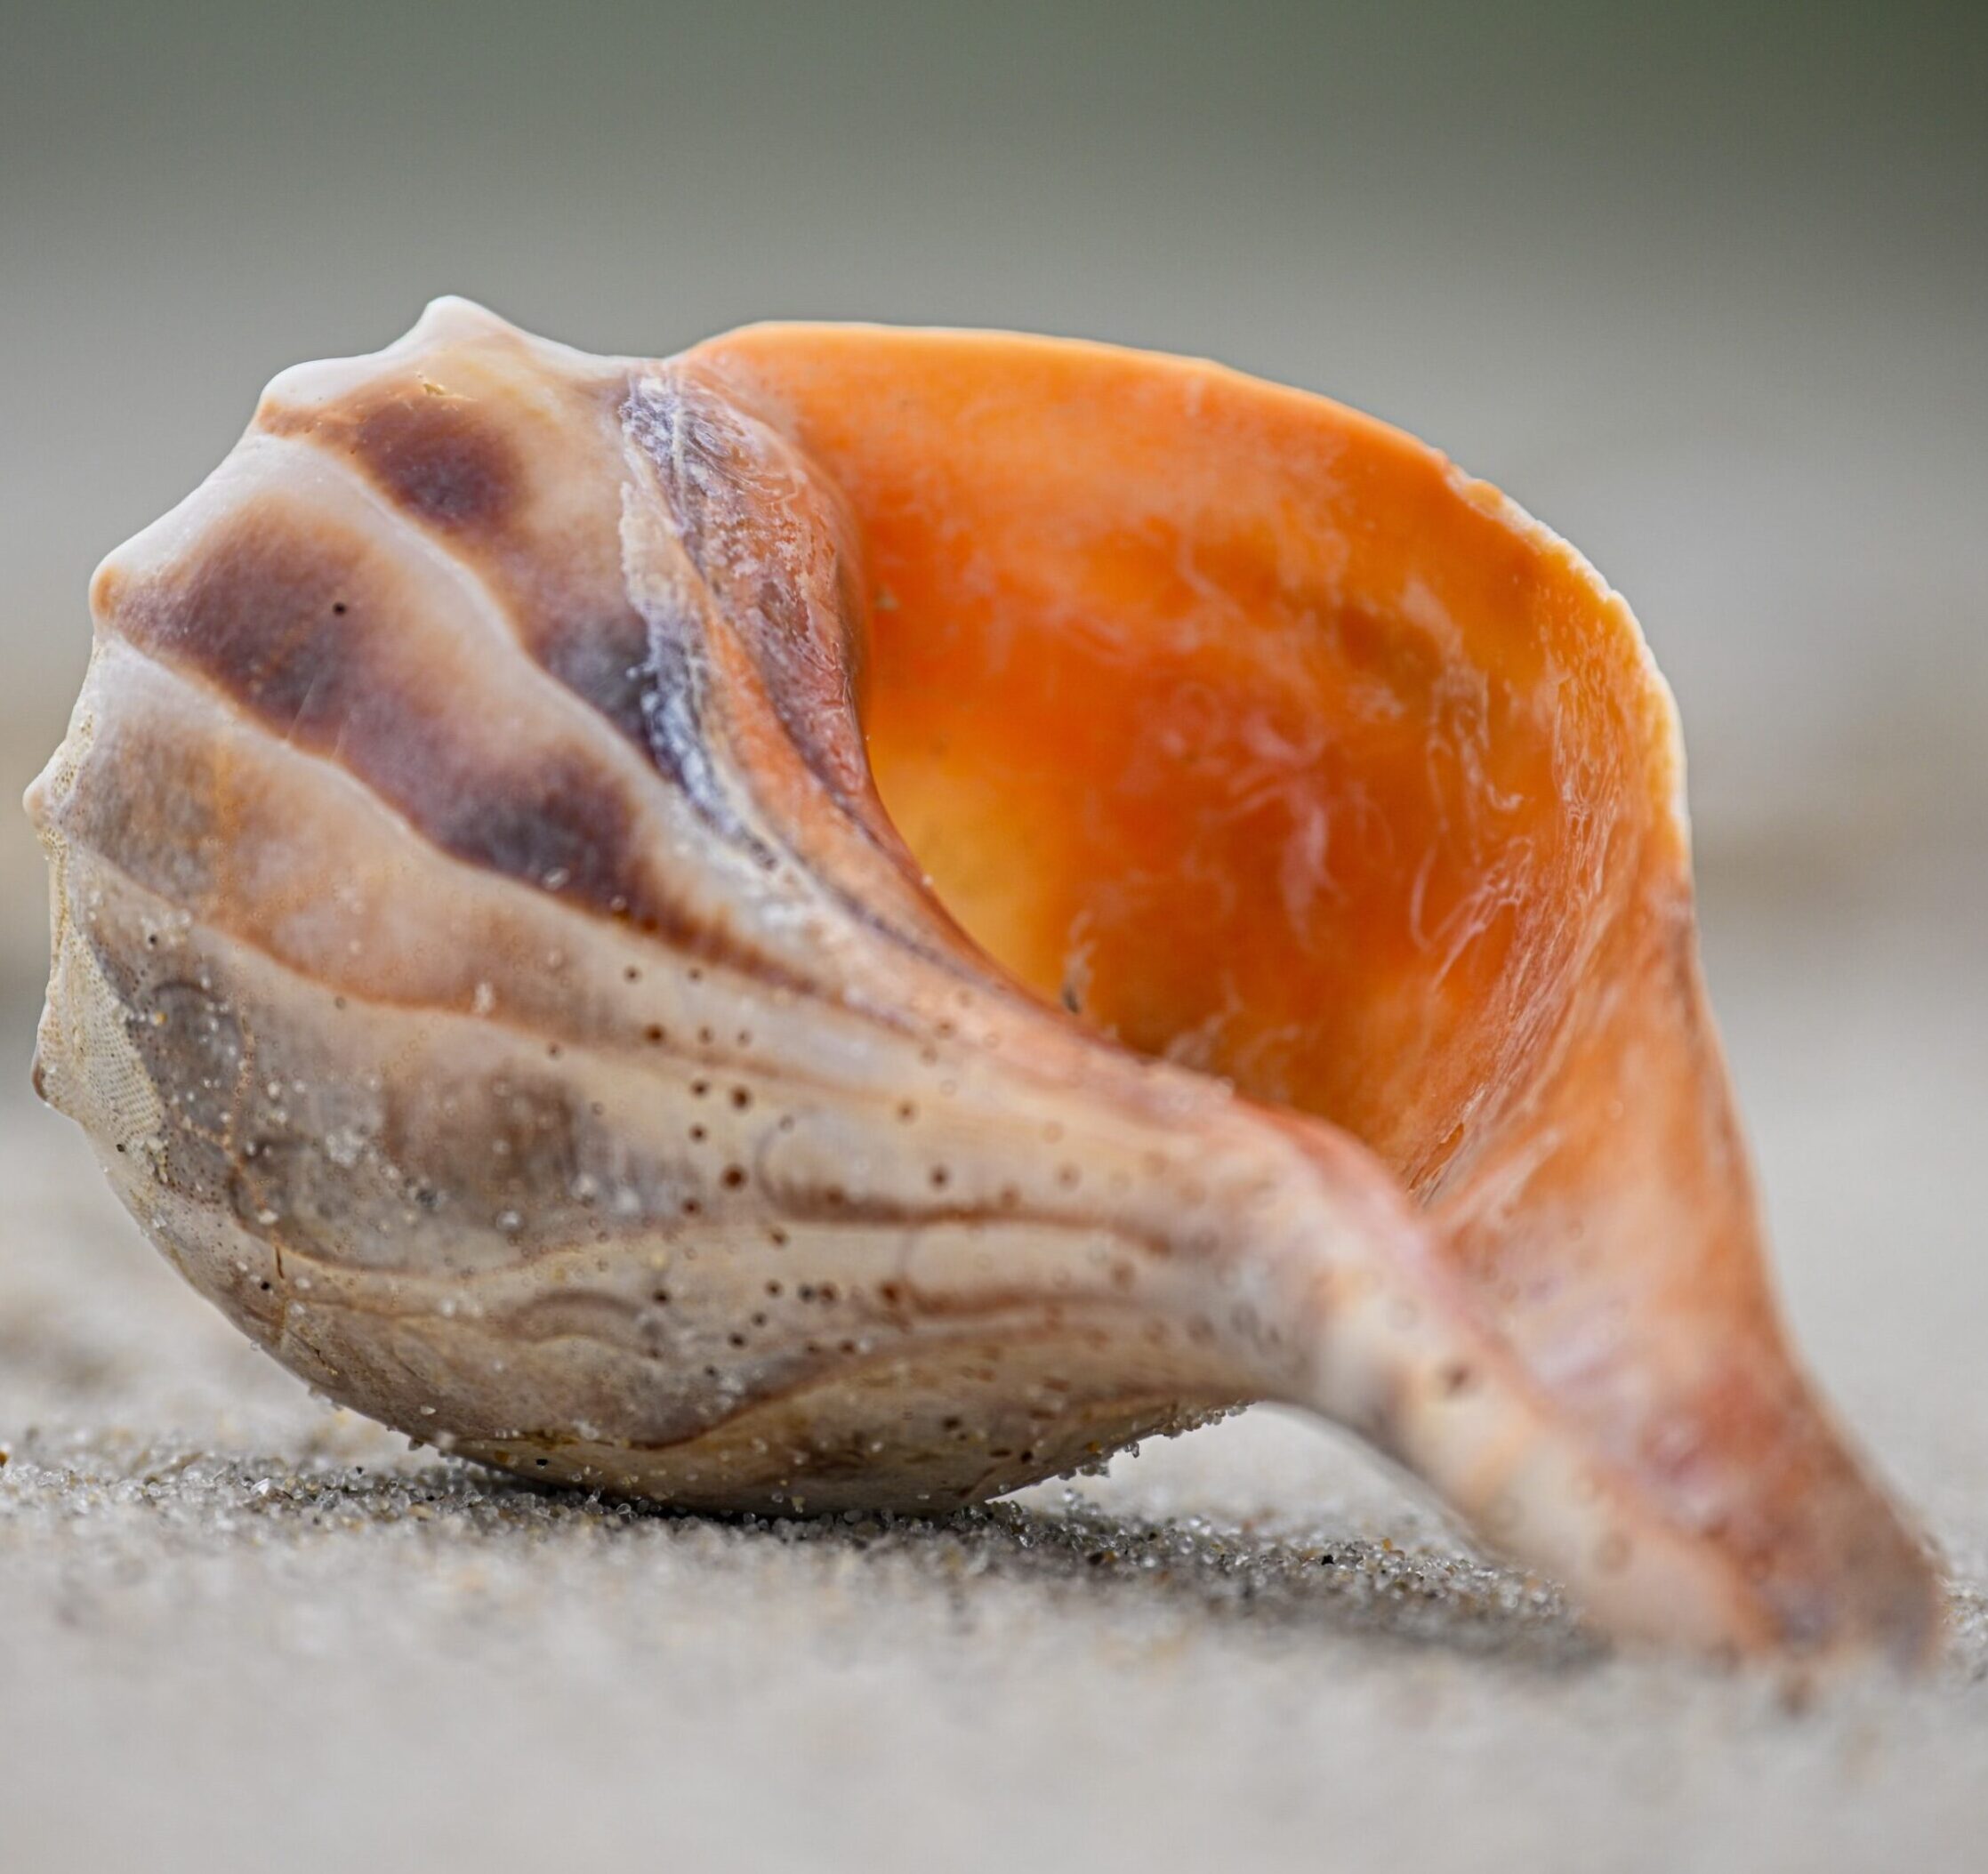 Close-up of a spiral seashell with a vibrant orange interior on sandy ground near hotels in Newport RI.